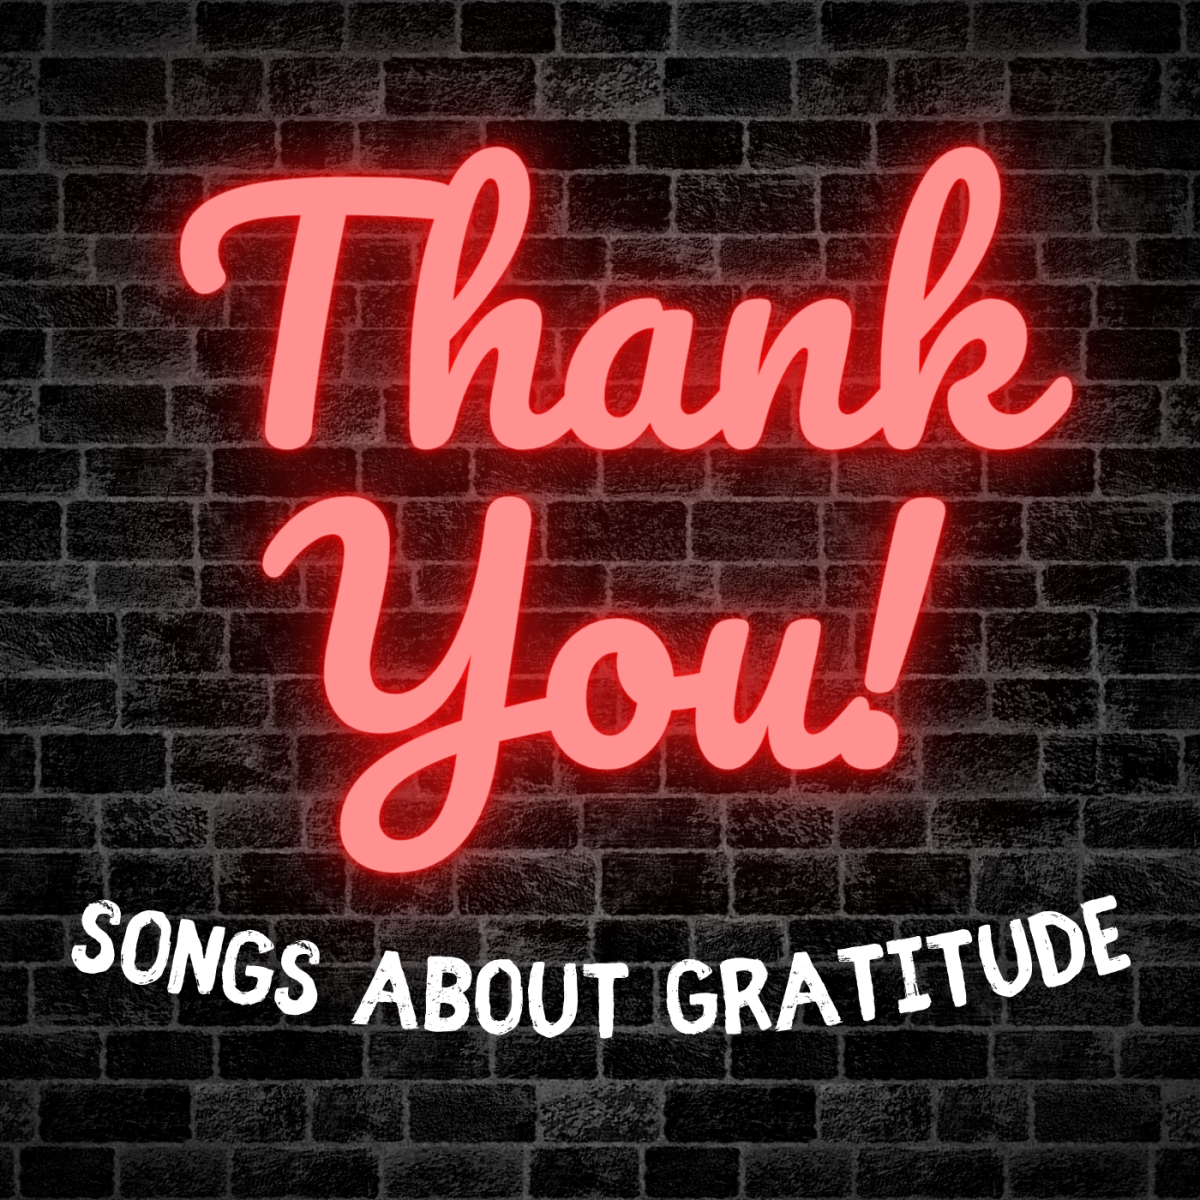 100 Best Thank You Songs - Spinditty